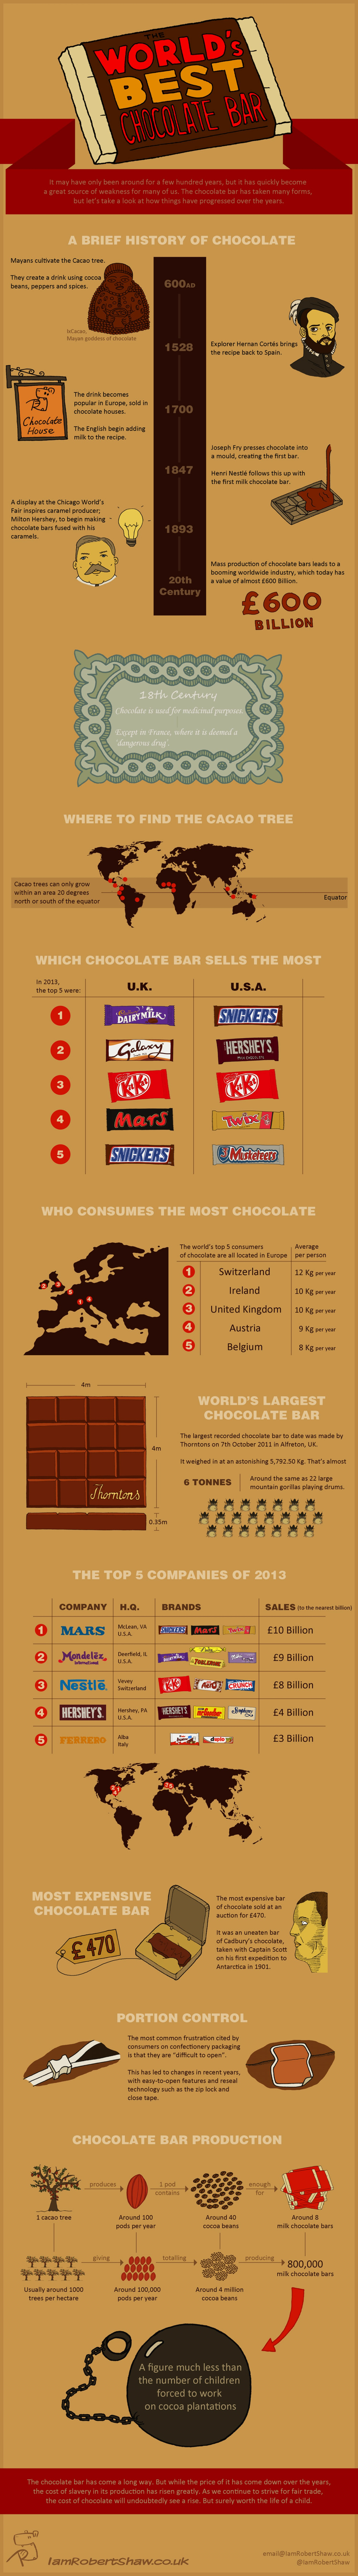 A history of the chocolate bar, and which brands sell the most.